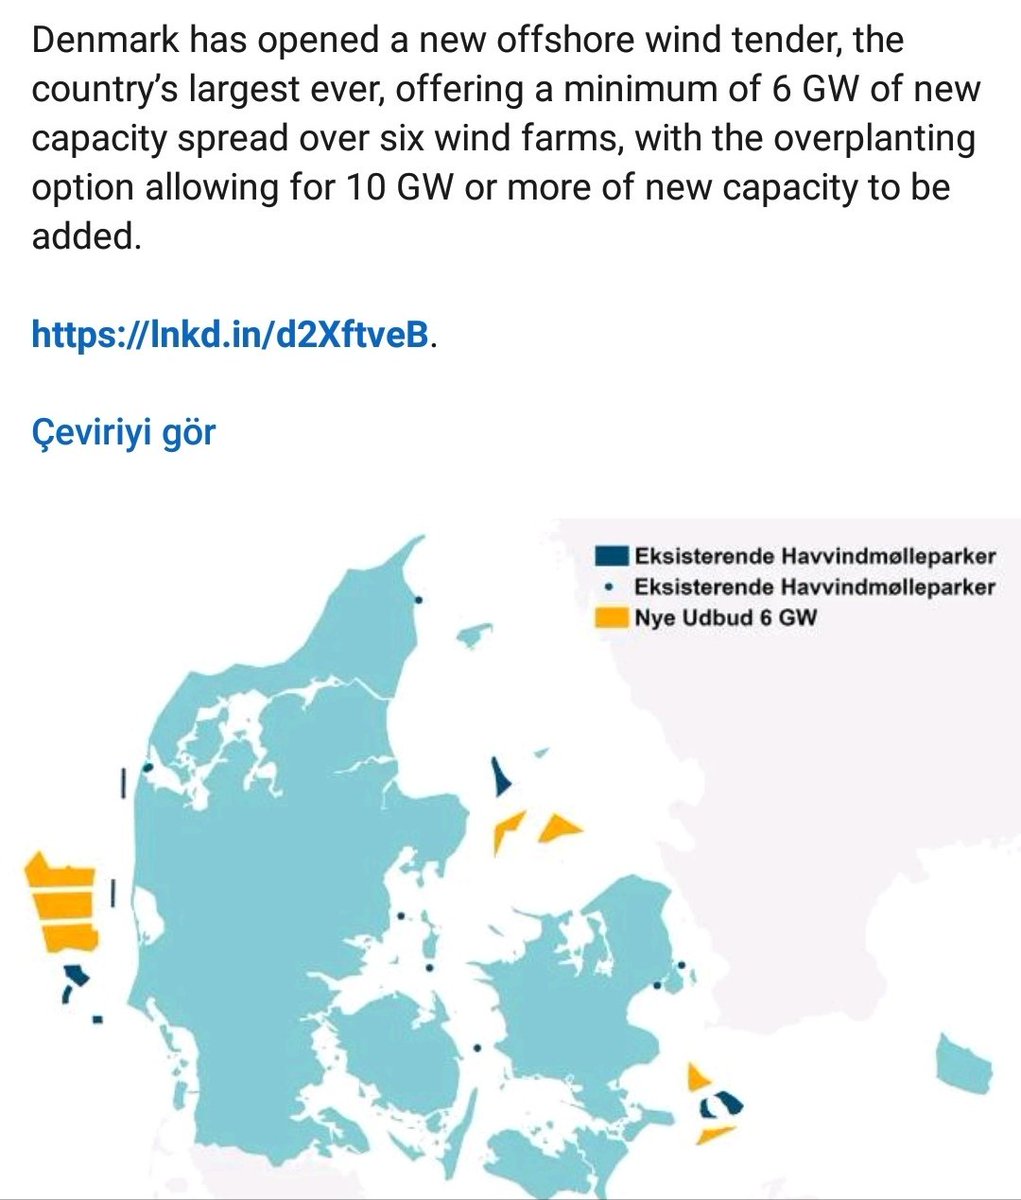 Denmark has opened a new offshore wind tender, the country’s largest ever, offering a minimum of 6 GW of new capacity spread over six wind farms, with the overplanting option allowing for 10 GW or more of new capacity to be added.

lnkd.in/d2XftveB.